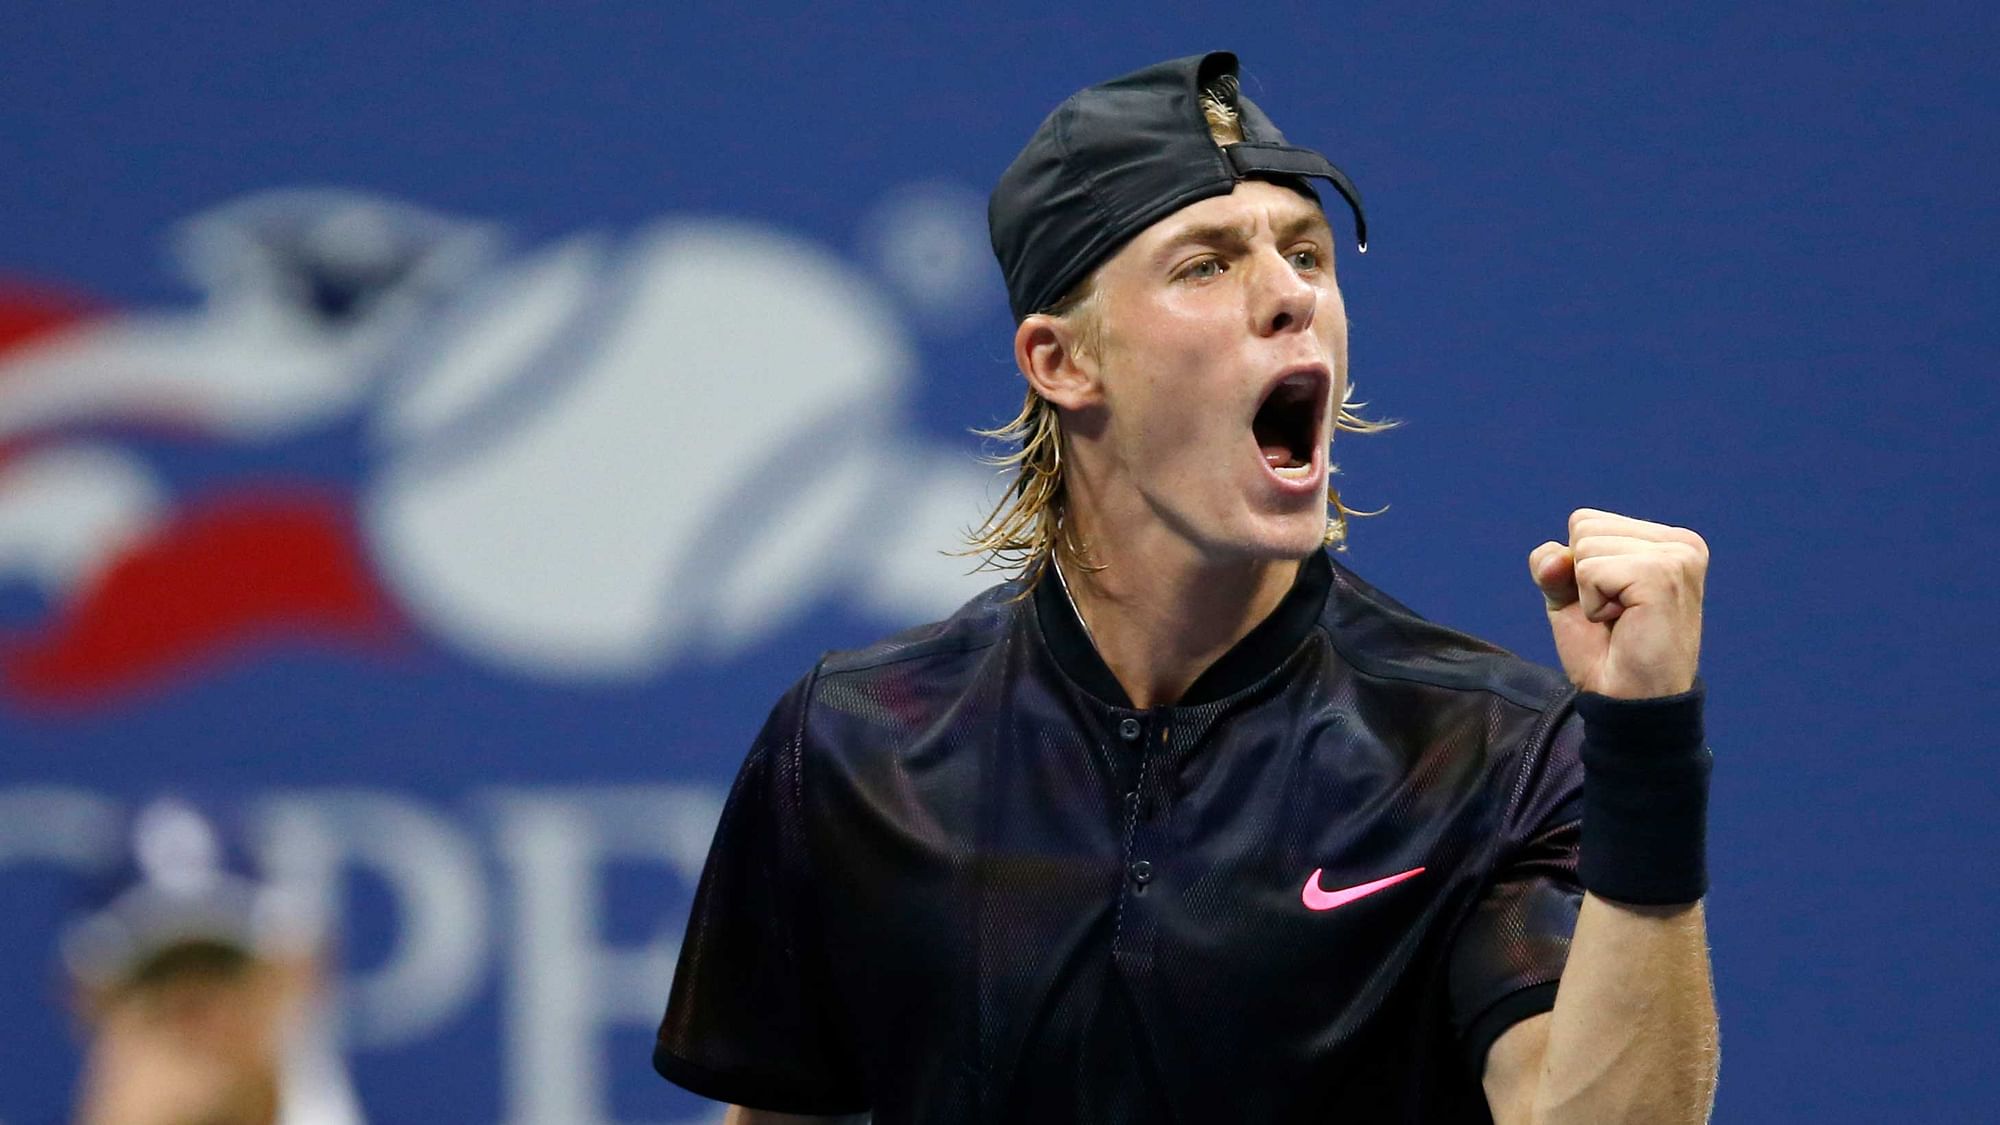 Denis Shapovalov, of Canada, celebrates during the second set of his match against Jo-Wilfried Tsonga, of France, at the U.S. Open tennis tournament in New York